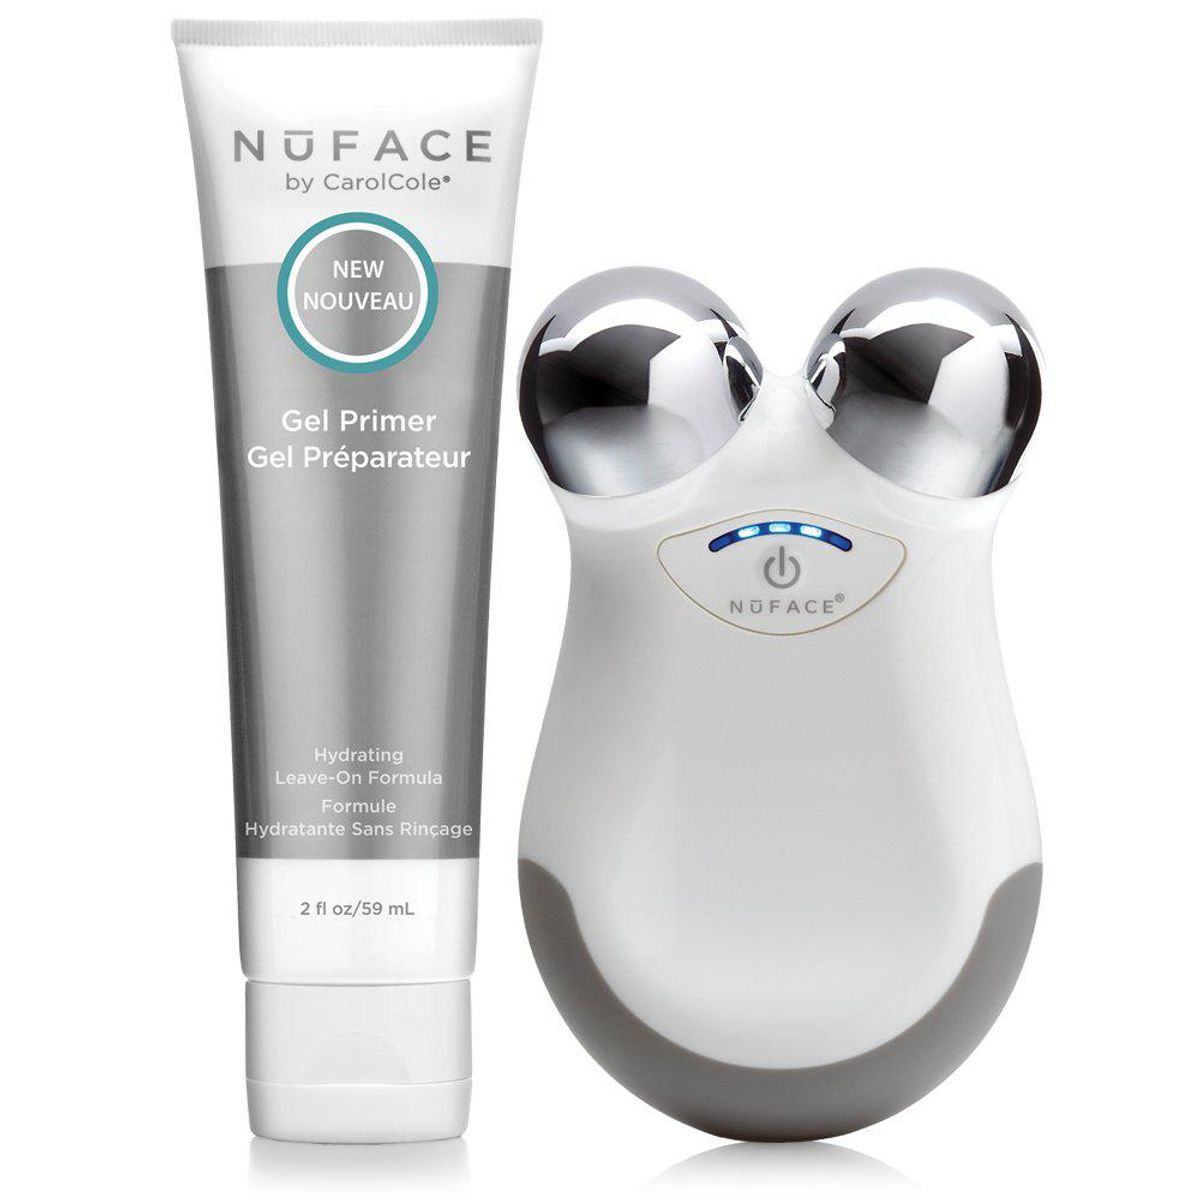 nuface mini petite facial toning device mini device and hydrating leave on gel primer